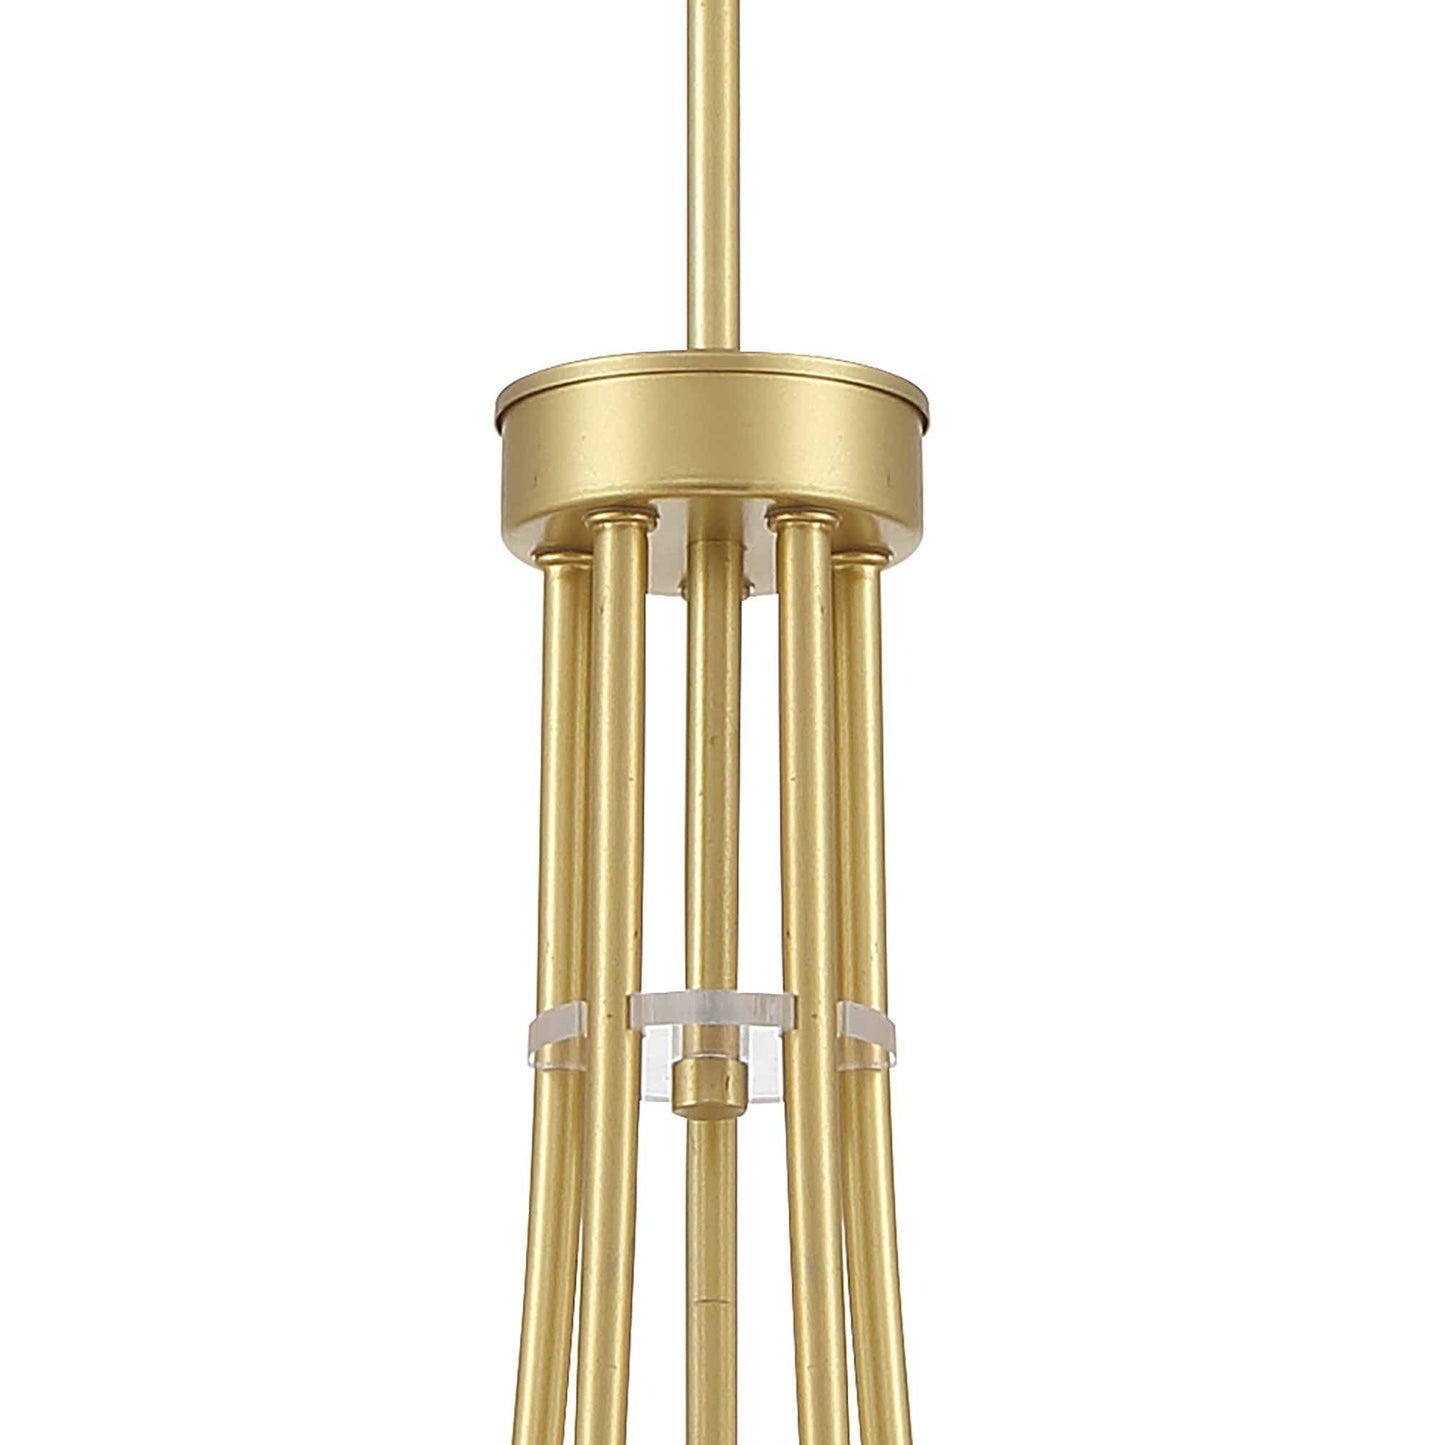 10 light candle style classic chandelier (4) by ACROMA